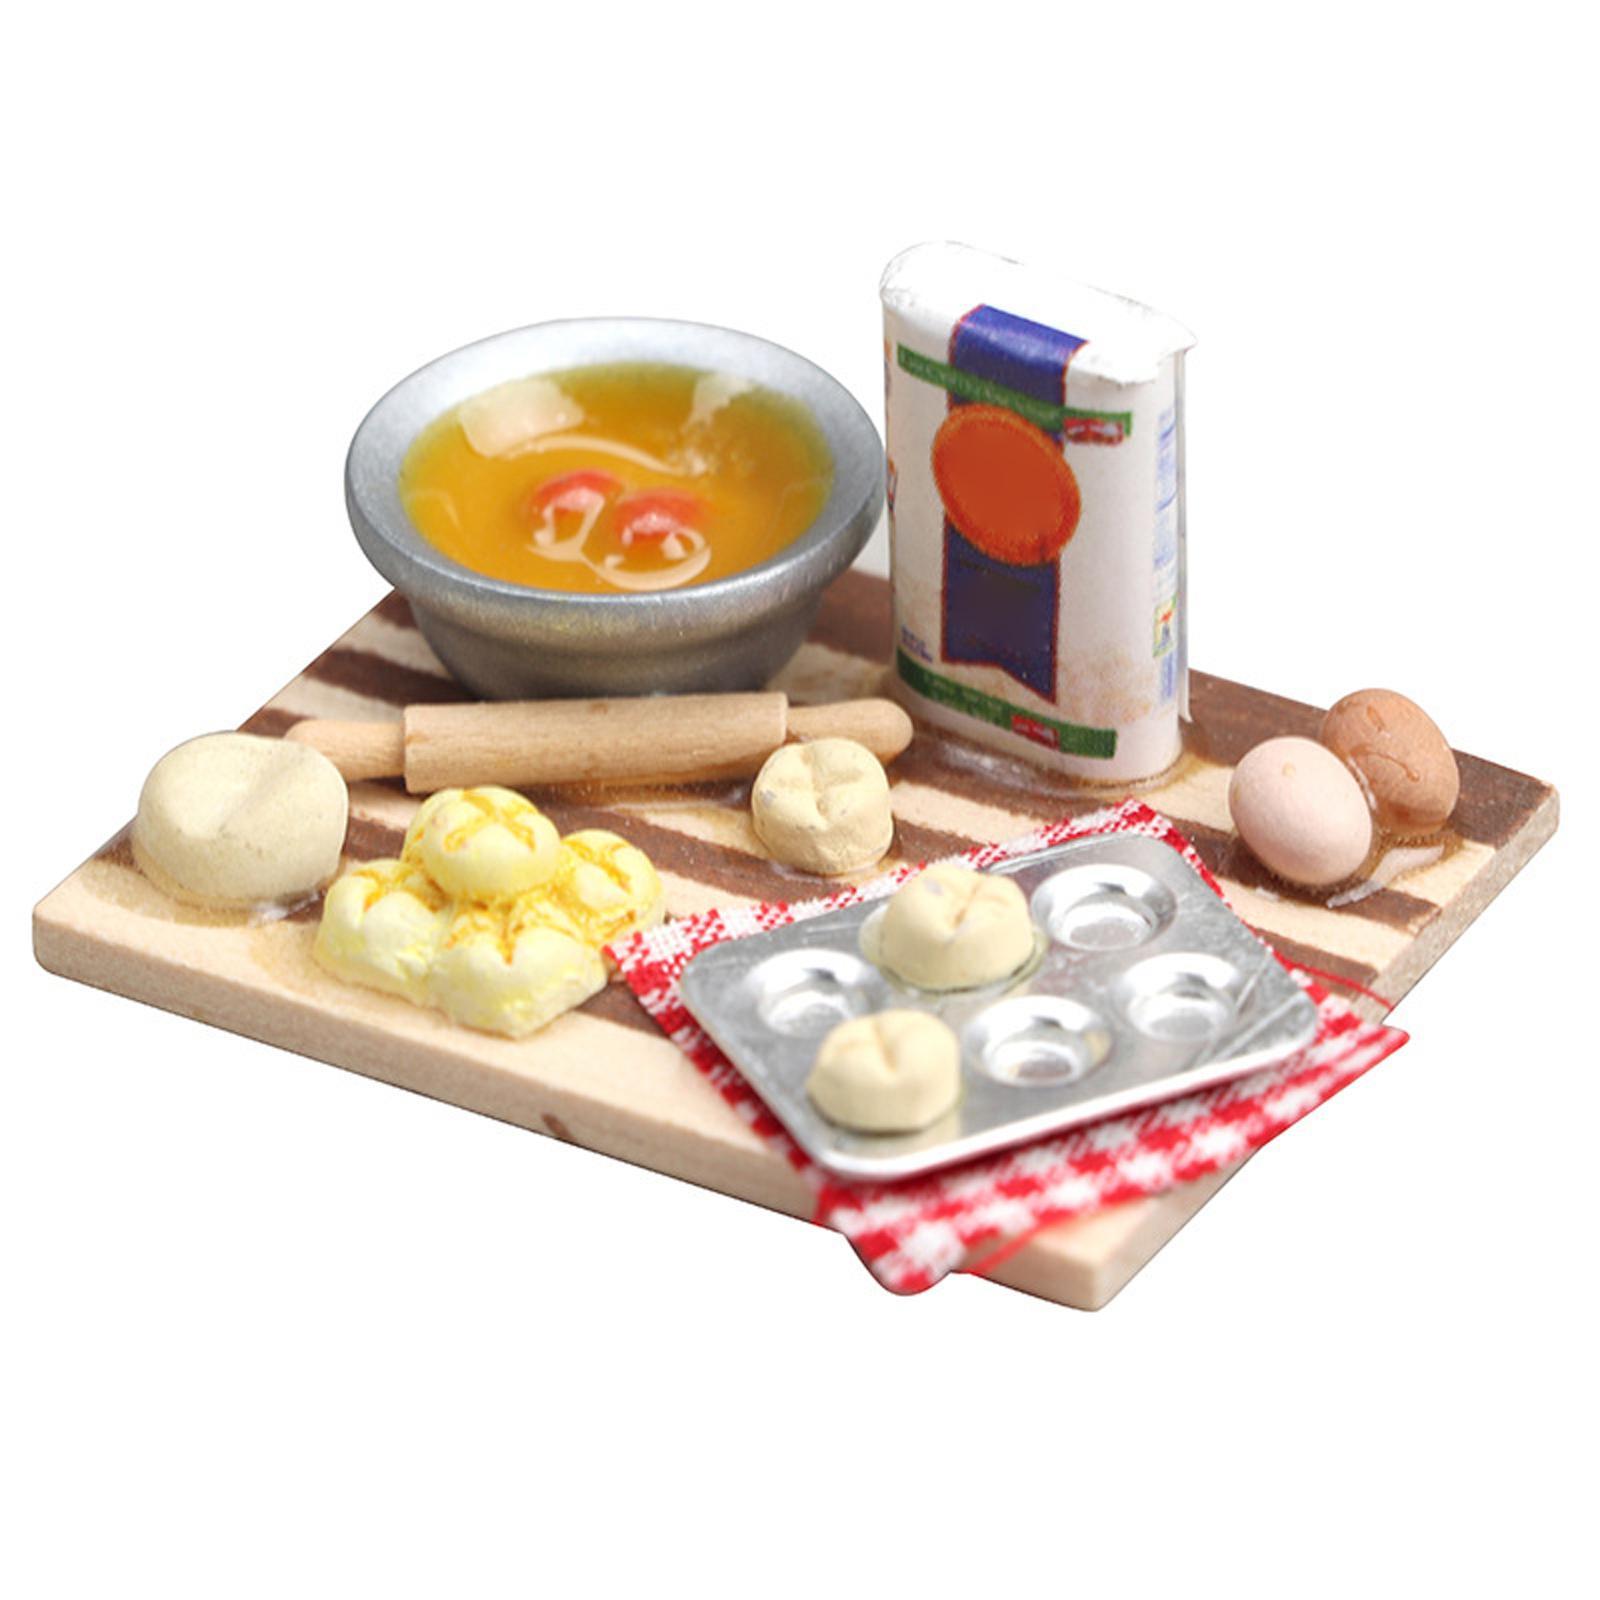 1:12 Dollhouse Food Baking Set Pastry Toy Simulation Food Milk Egg Bread Model Cookware Miniature Kitchen Decoration